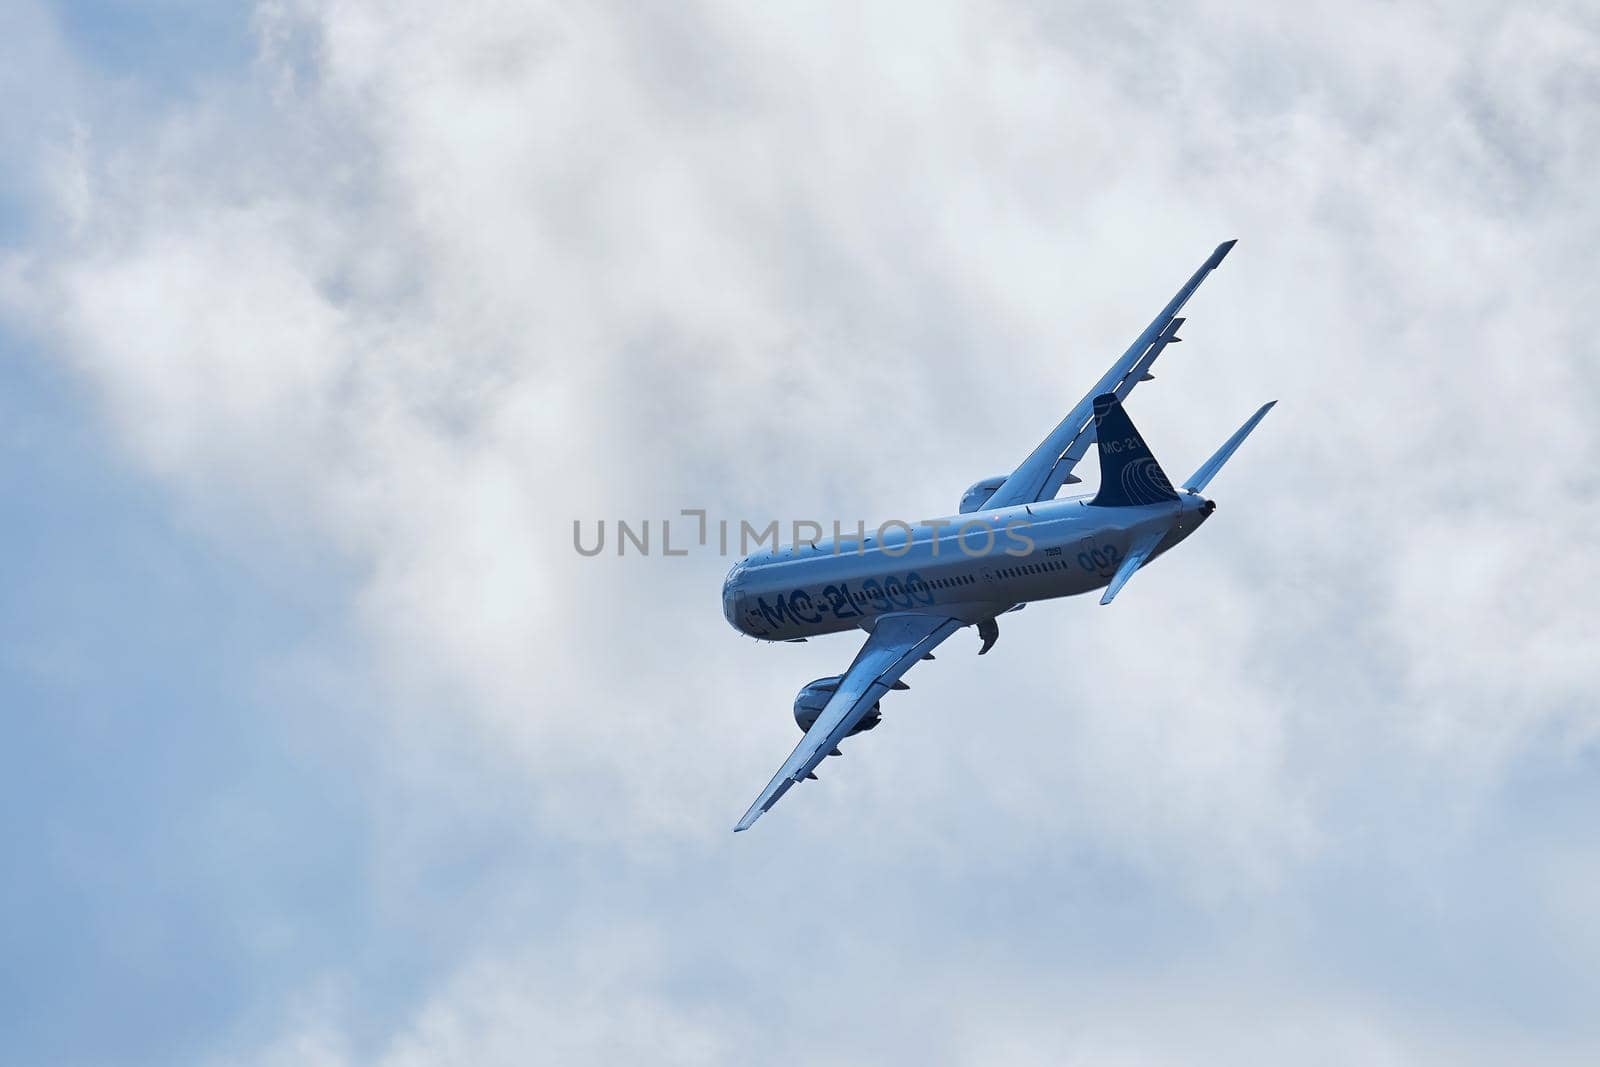 New Russian passenger aircraft MS-21-300 flying prototype of a new Russian civil airliner during test flights on MAKS 2019 airshow. ZHUKOVSKY, RUSSIA, AUGUST 27, 2019 by EvgeniyQW